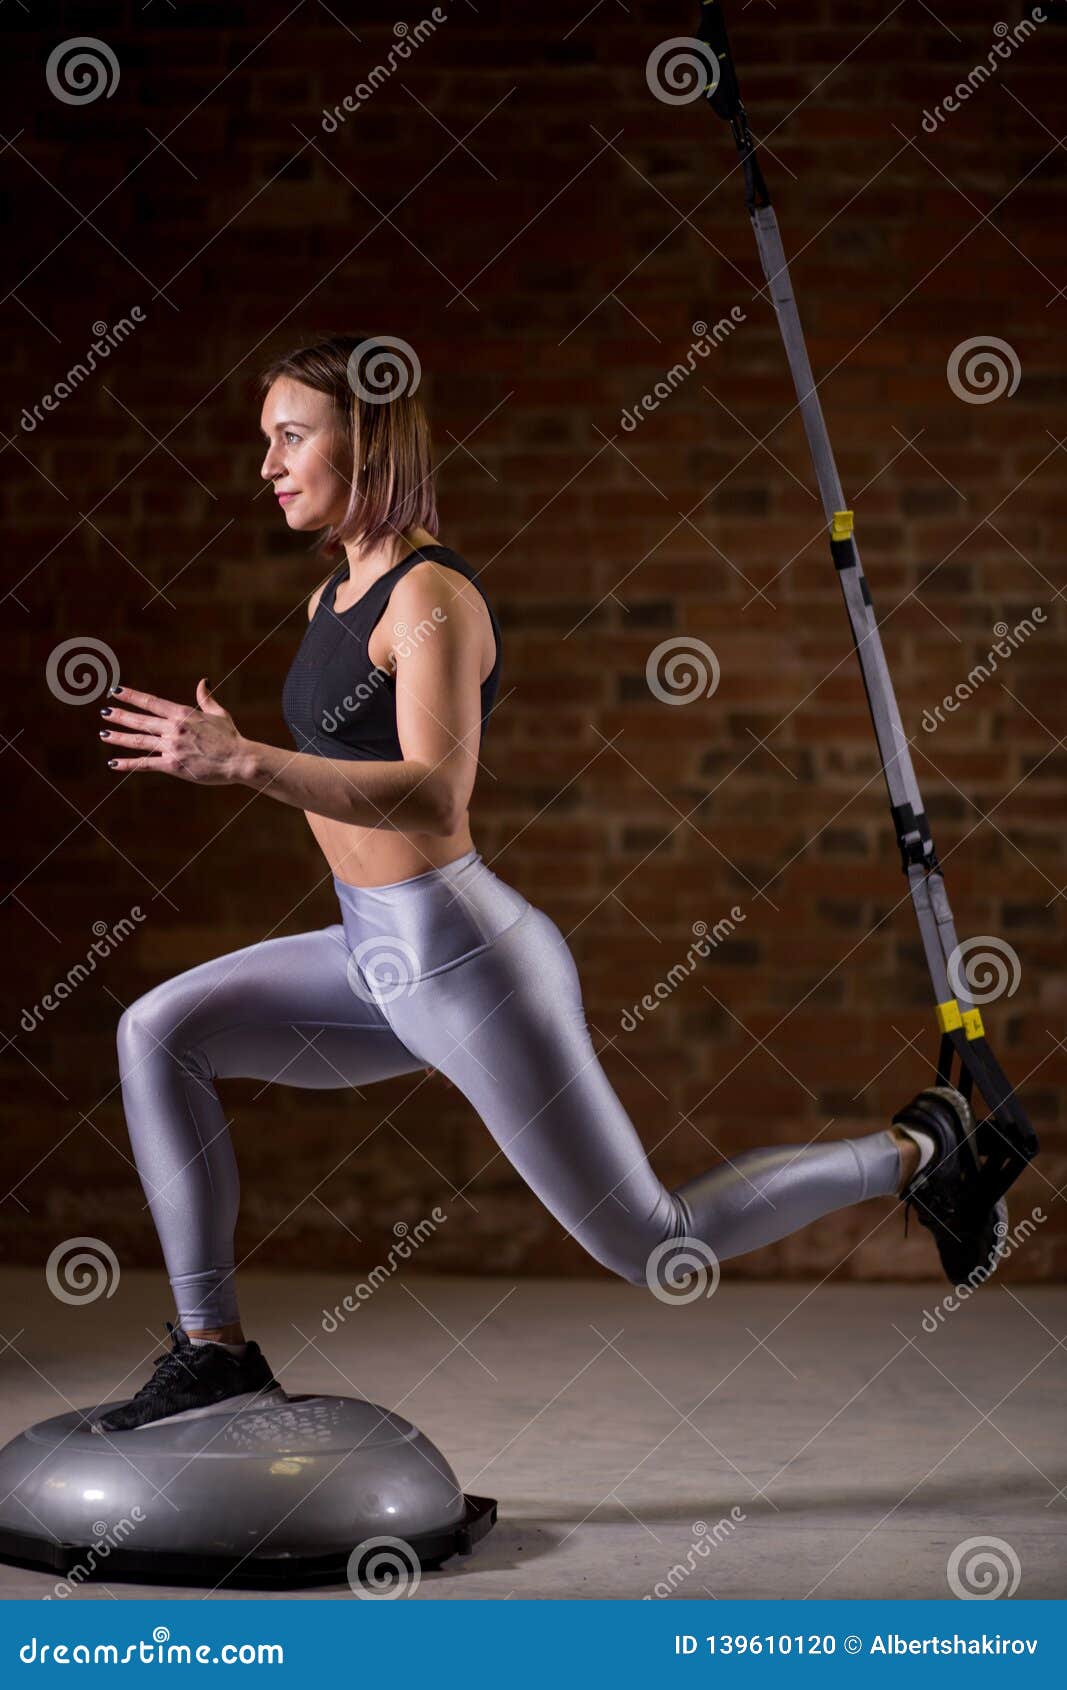 https://thumbs.dreamstime.com/z/fitness-woman-workout-trx-straps-gym-crossfit-style-training-trx-full-body-crossfit-workout-fit-well-shaped-woman-performing-139610120.jpg